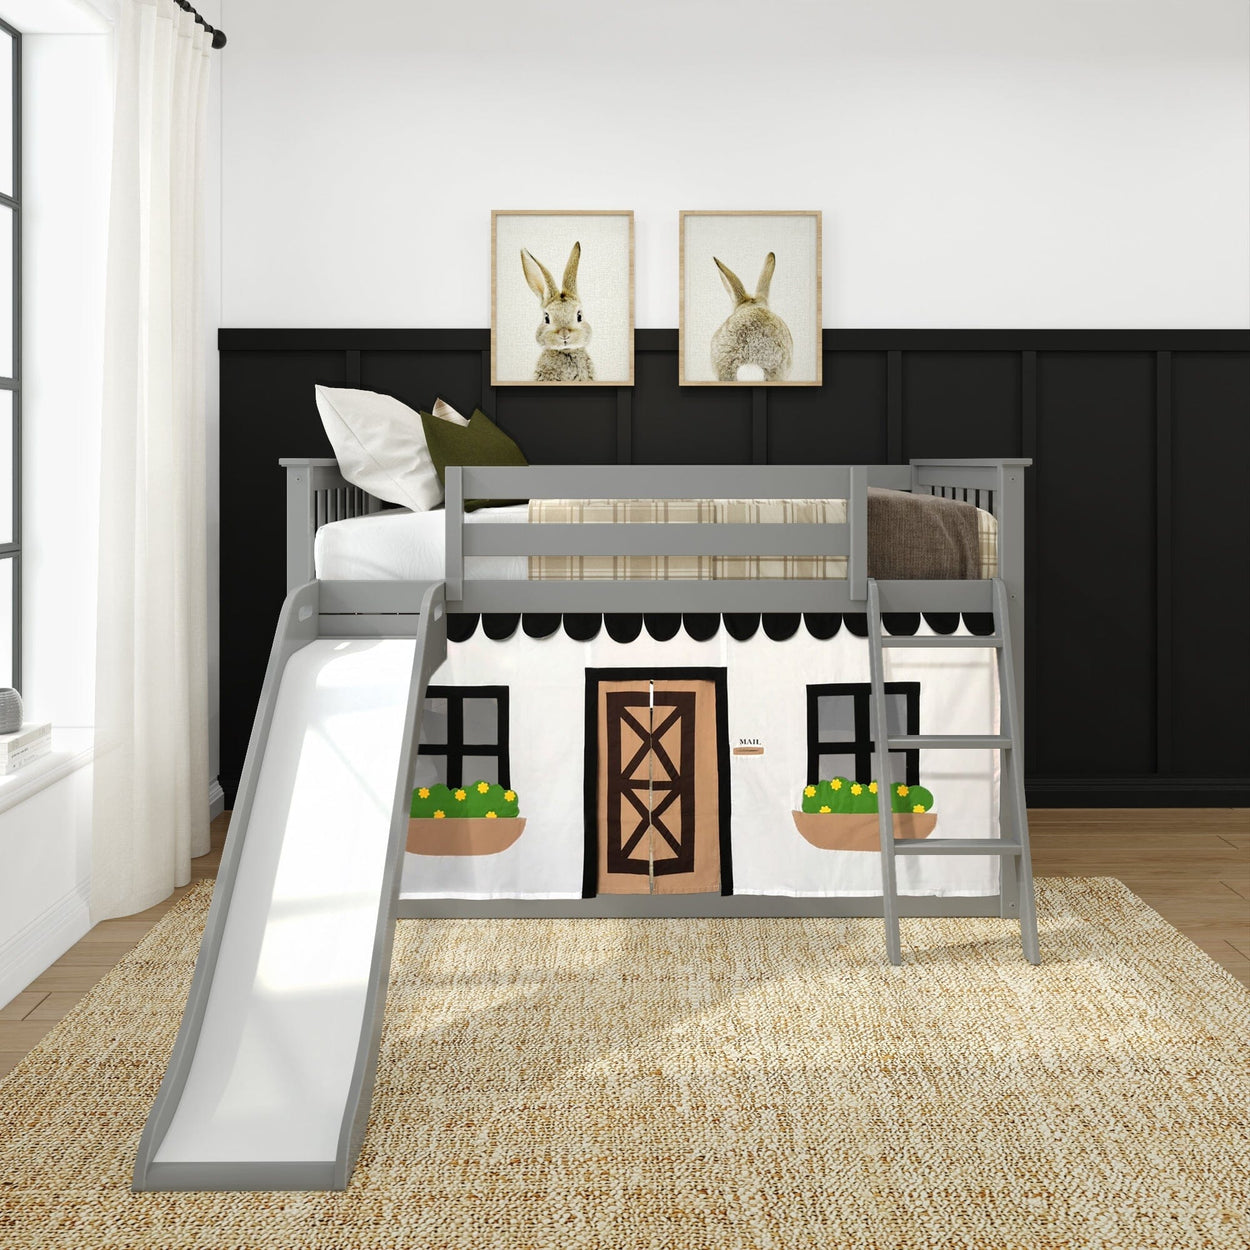 180417121069 : Bunk Beds Low Bunk with Easy Slide and Black and White Farmhouse Curtain, Grey